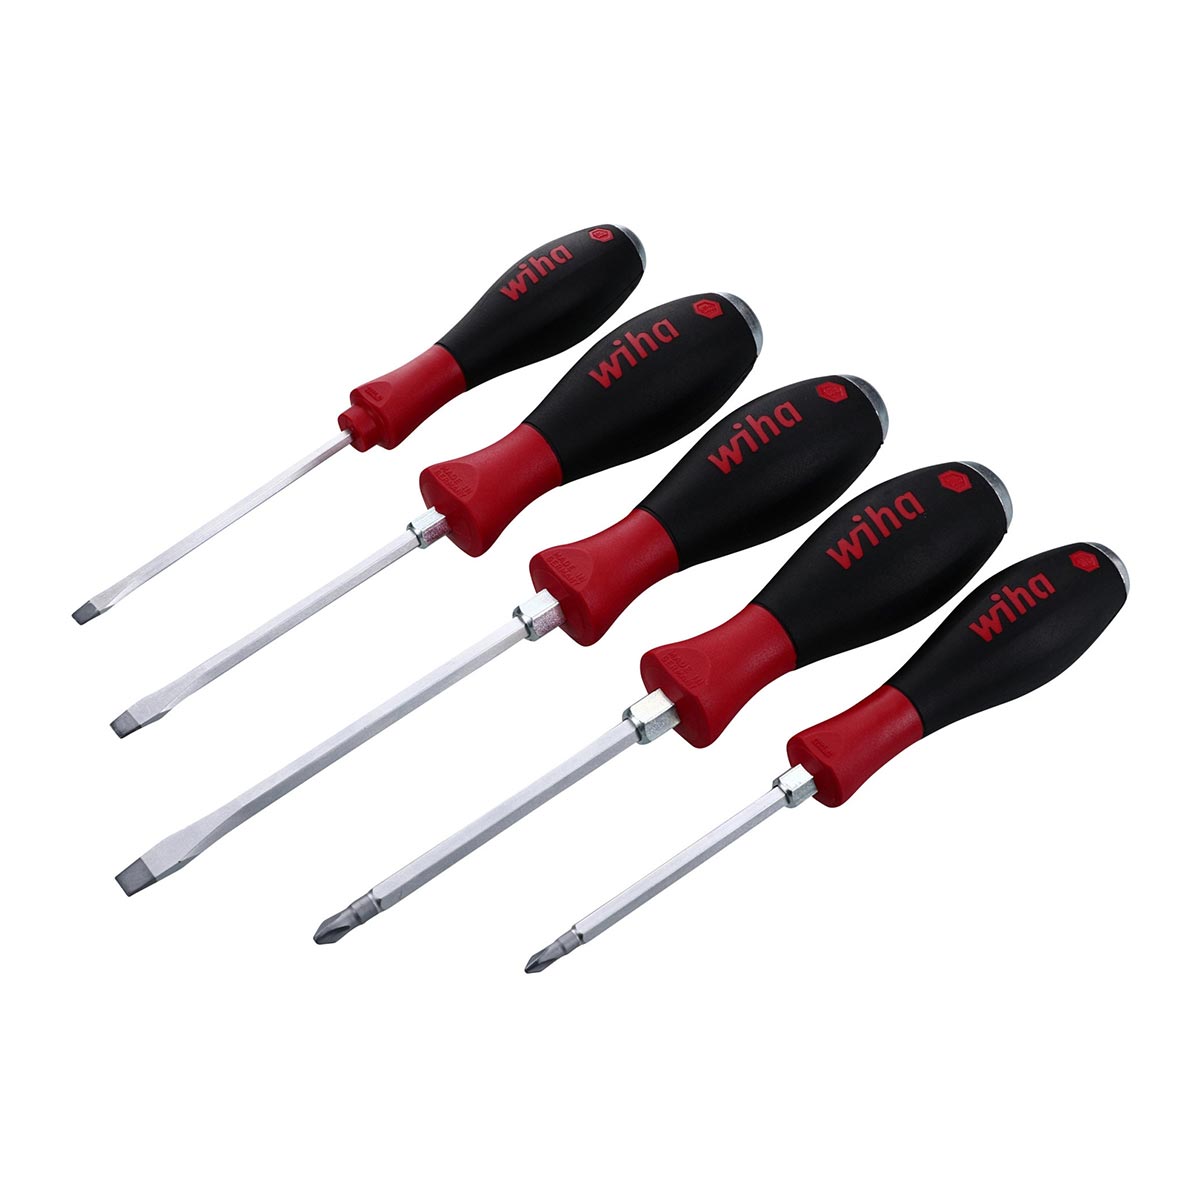 5 PIECE SOFTFINISH X HEAVY DUTY SLOTTED AND PHILLIPS SCREWDRIVER SET